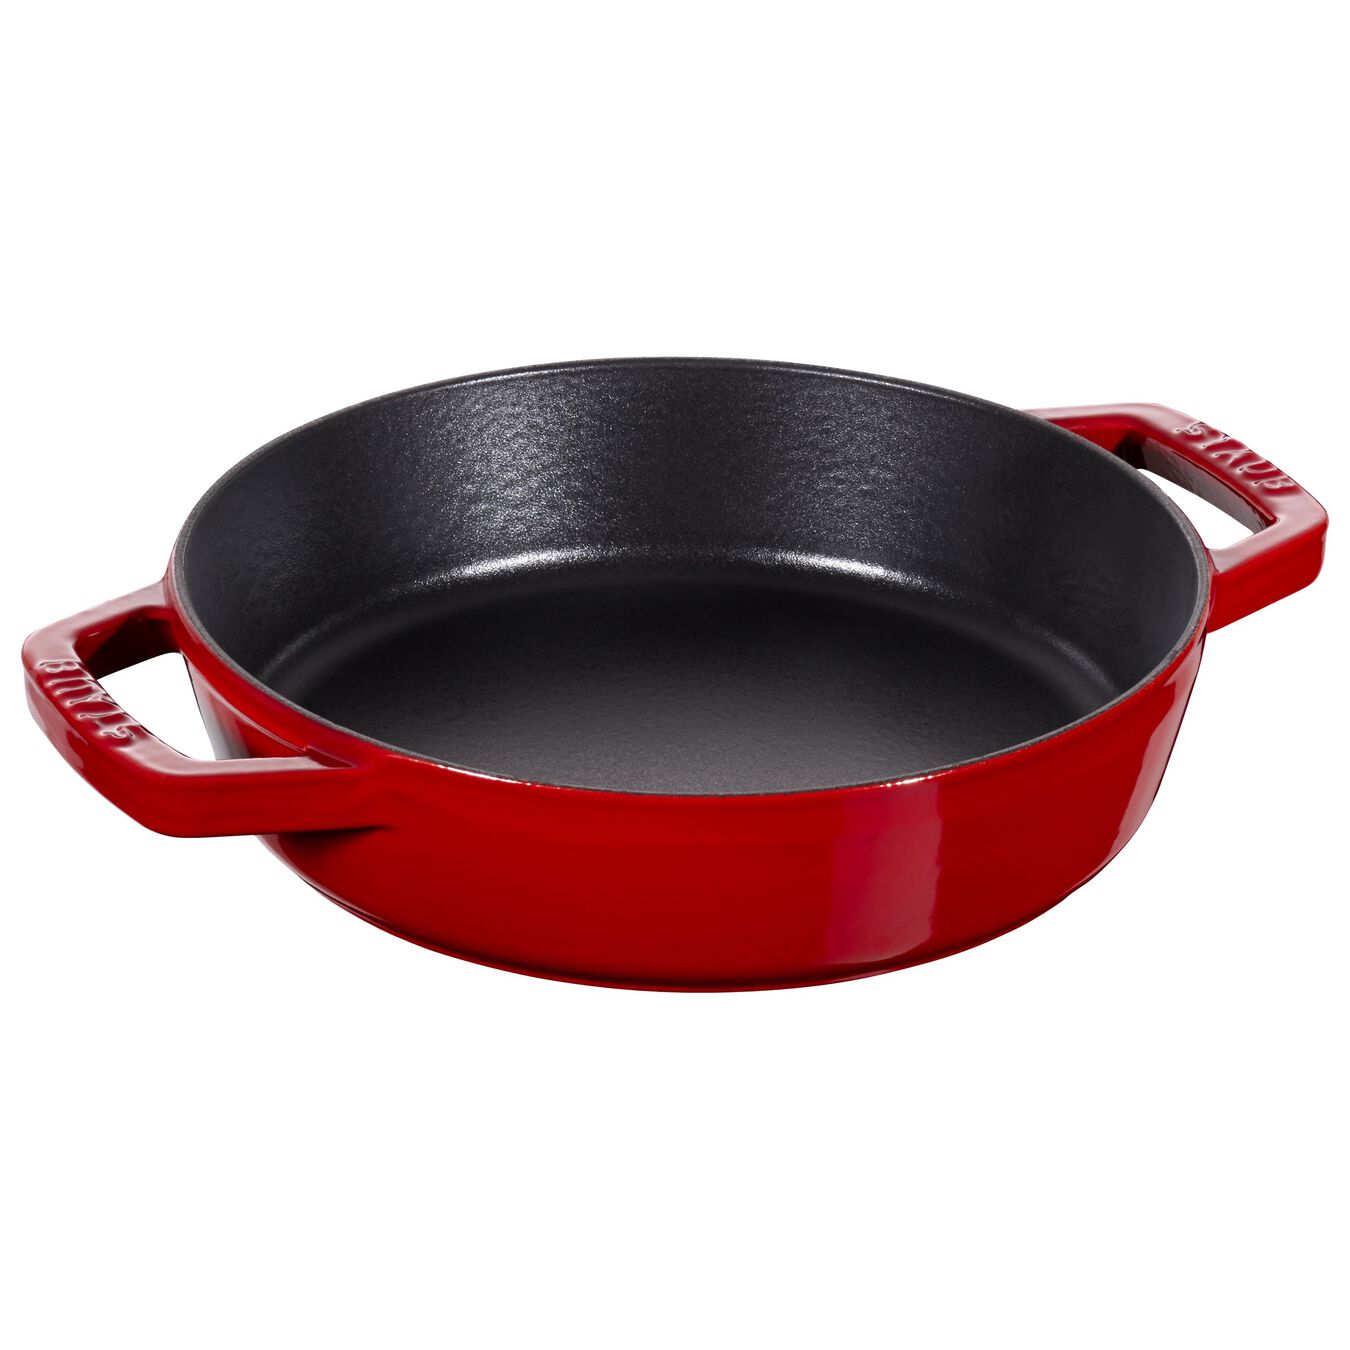 20 cm / 8 inch cast iron Frying pan with 2 handles, cherry - Visual Imperfections,,large 1